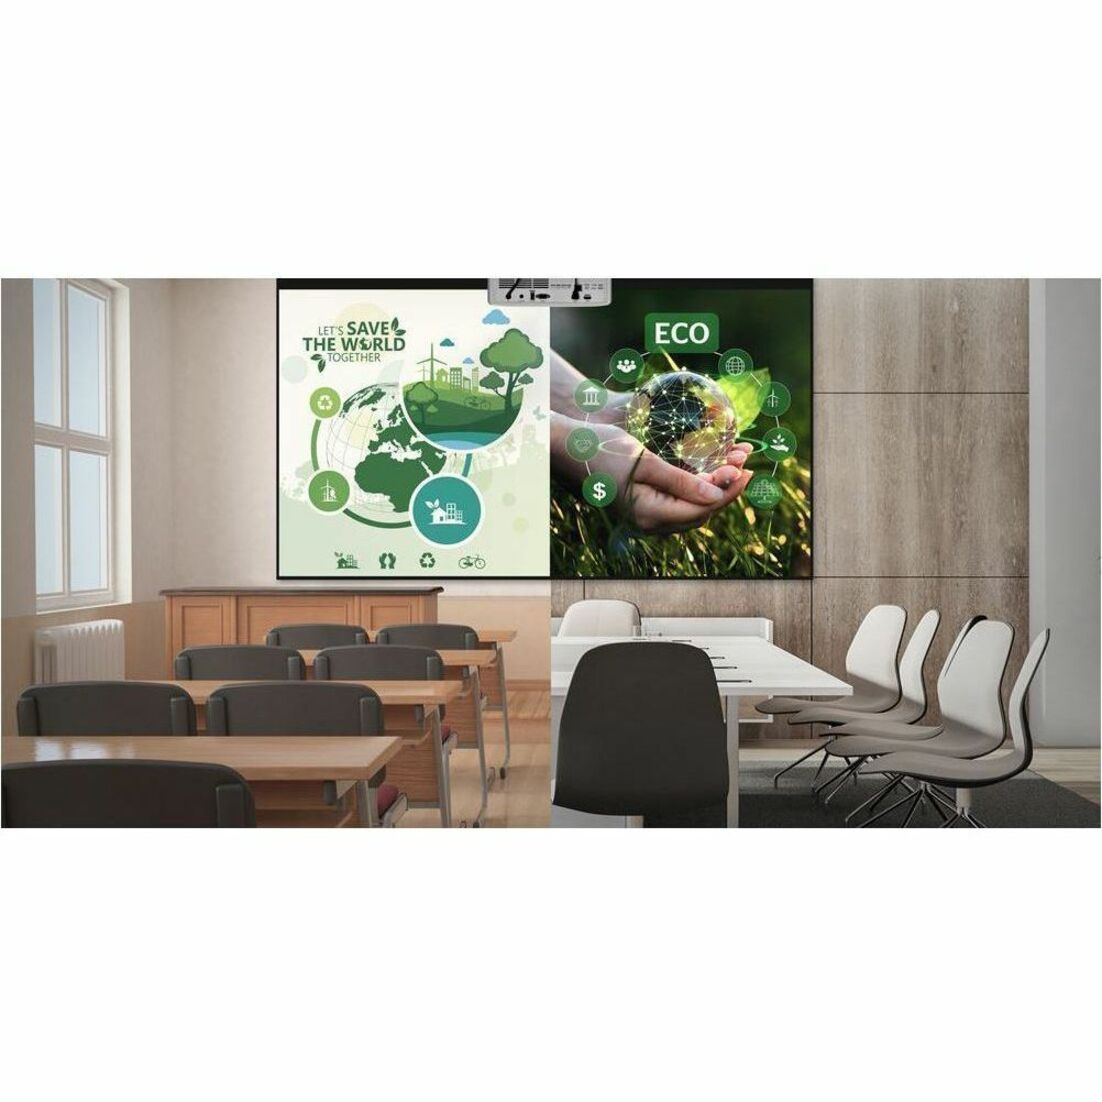 Optoma ZH420 DLP Projector - Ultra-Compact High Brightness Full HD Laser Projector, 16:9, 4300 lm